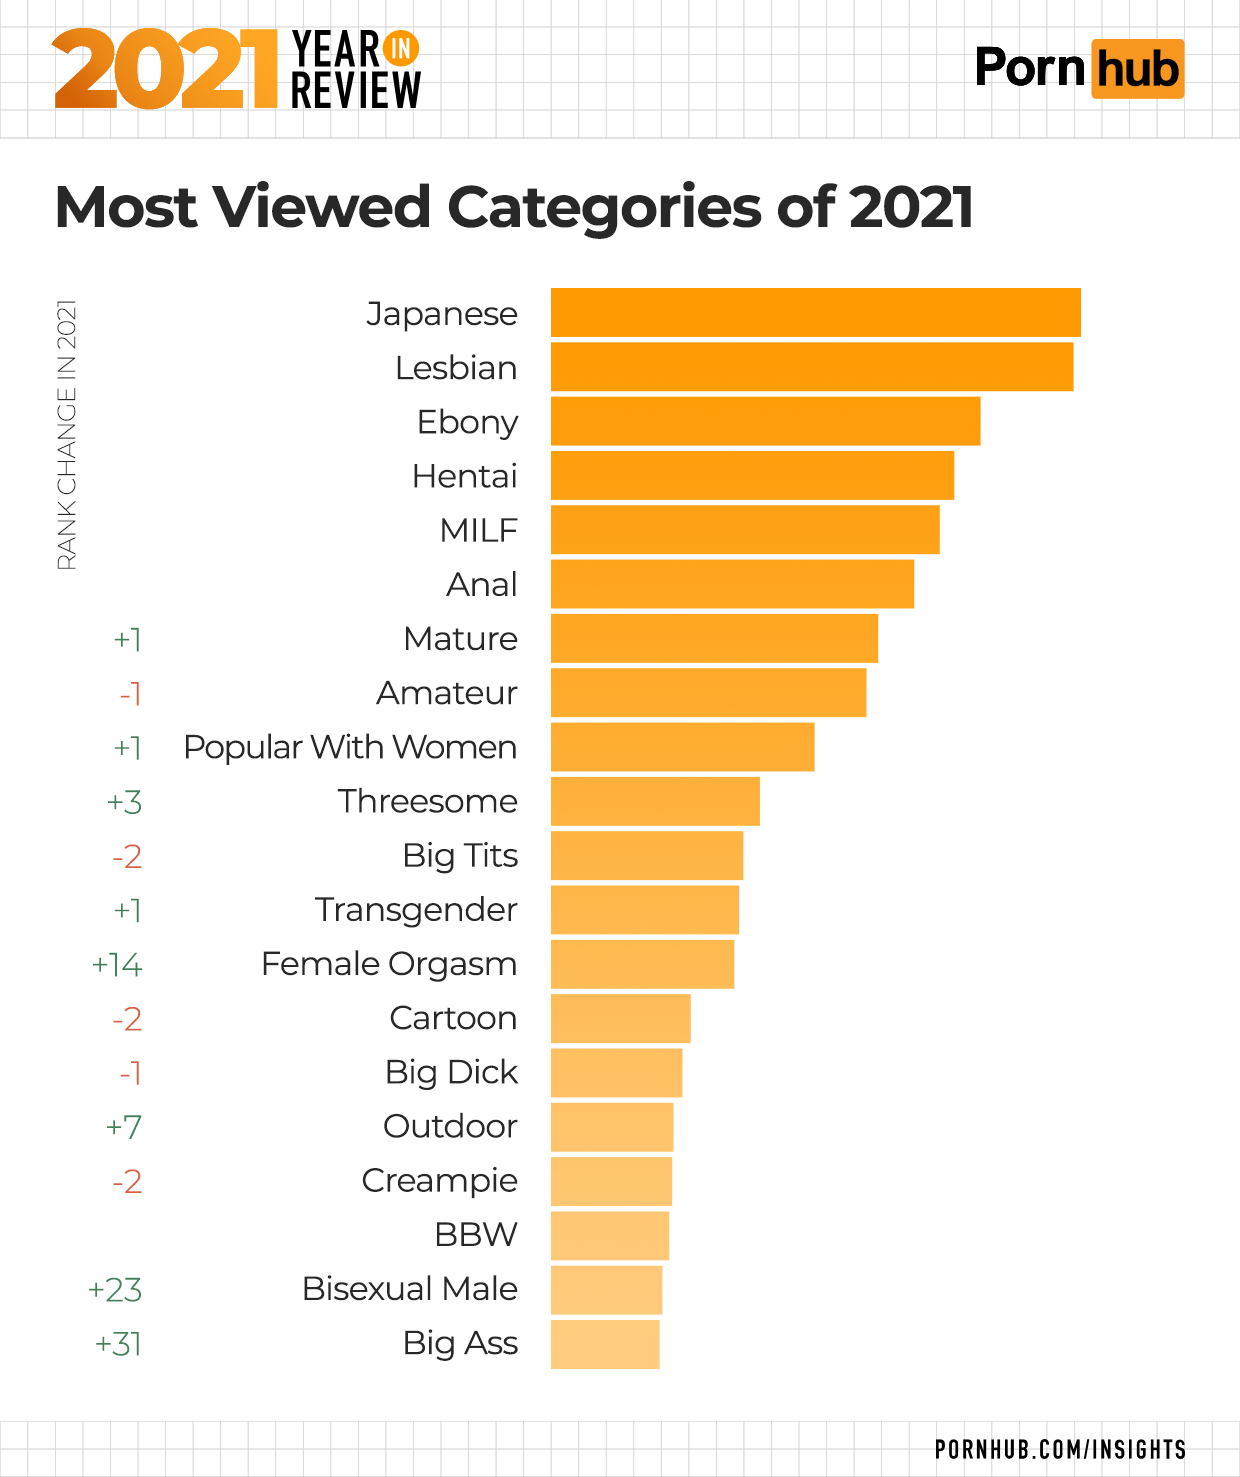 2021 Year in Review Pornhub Insights